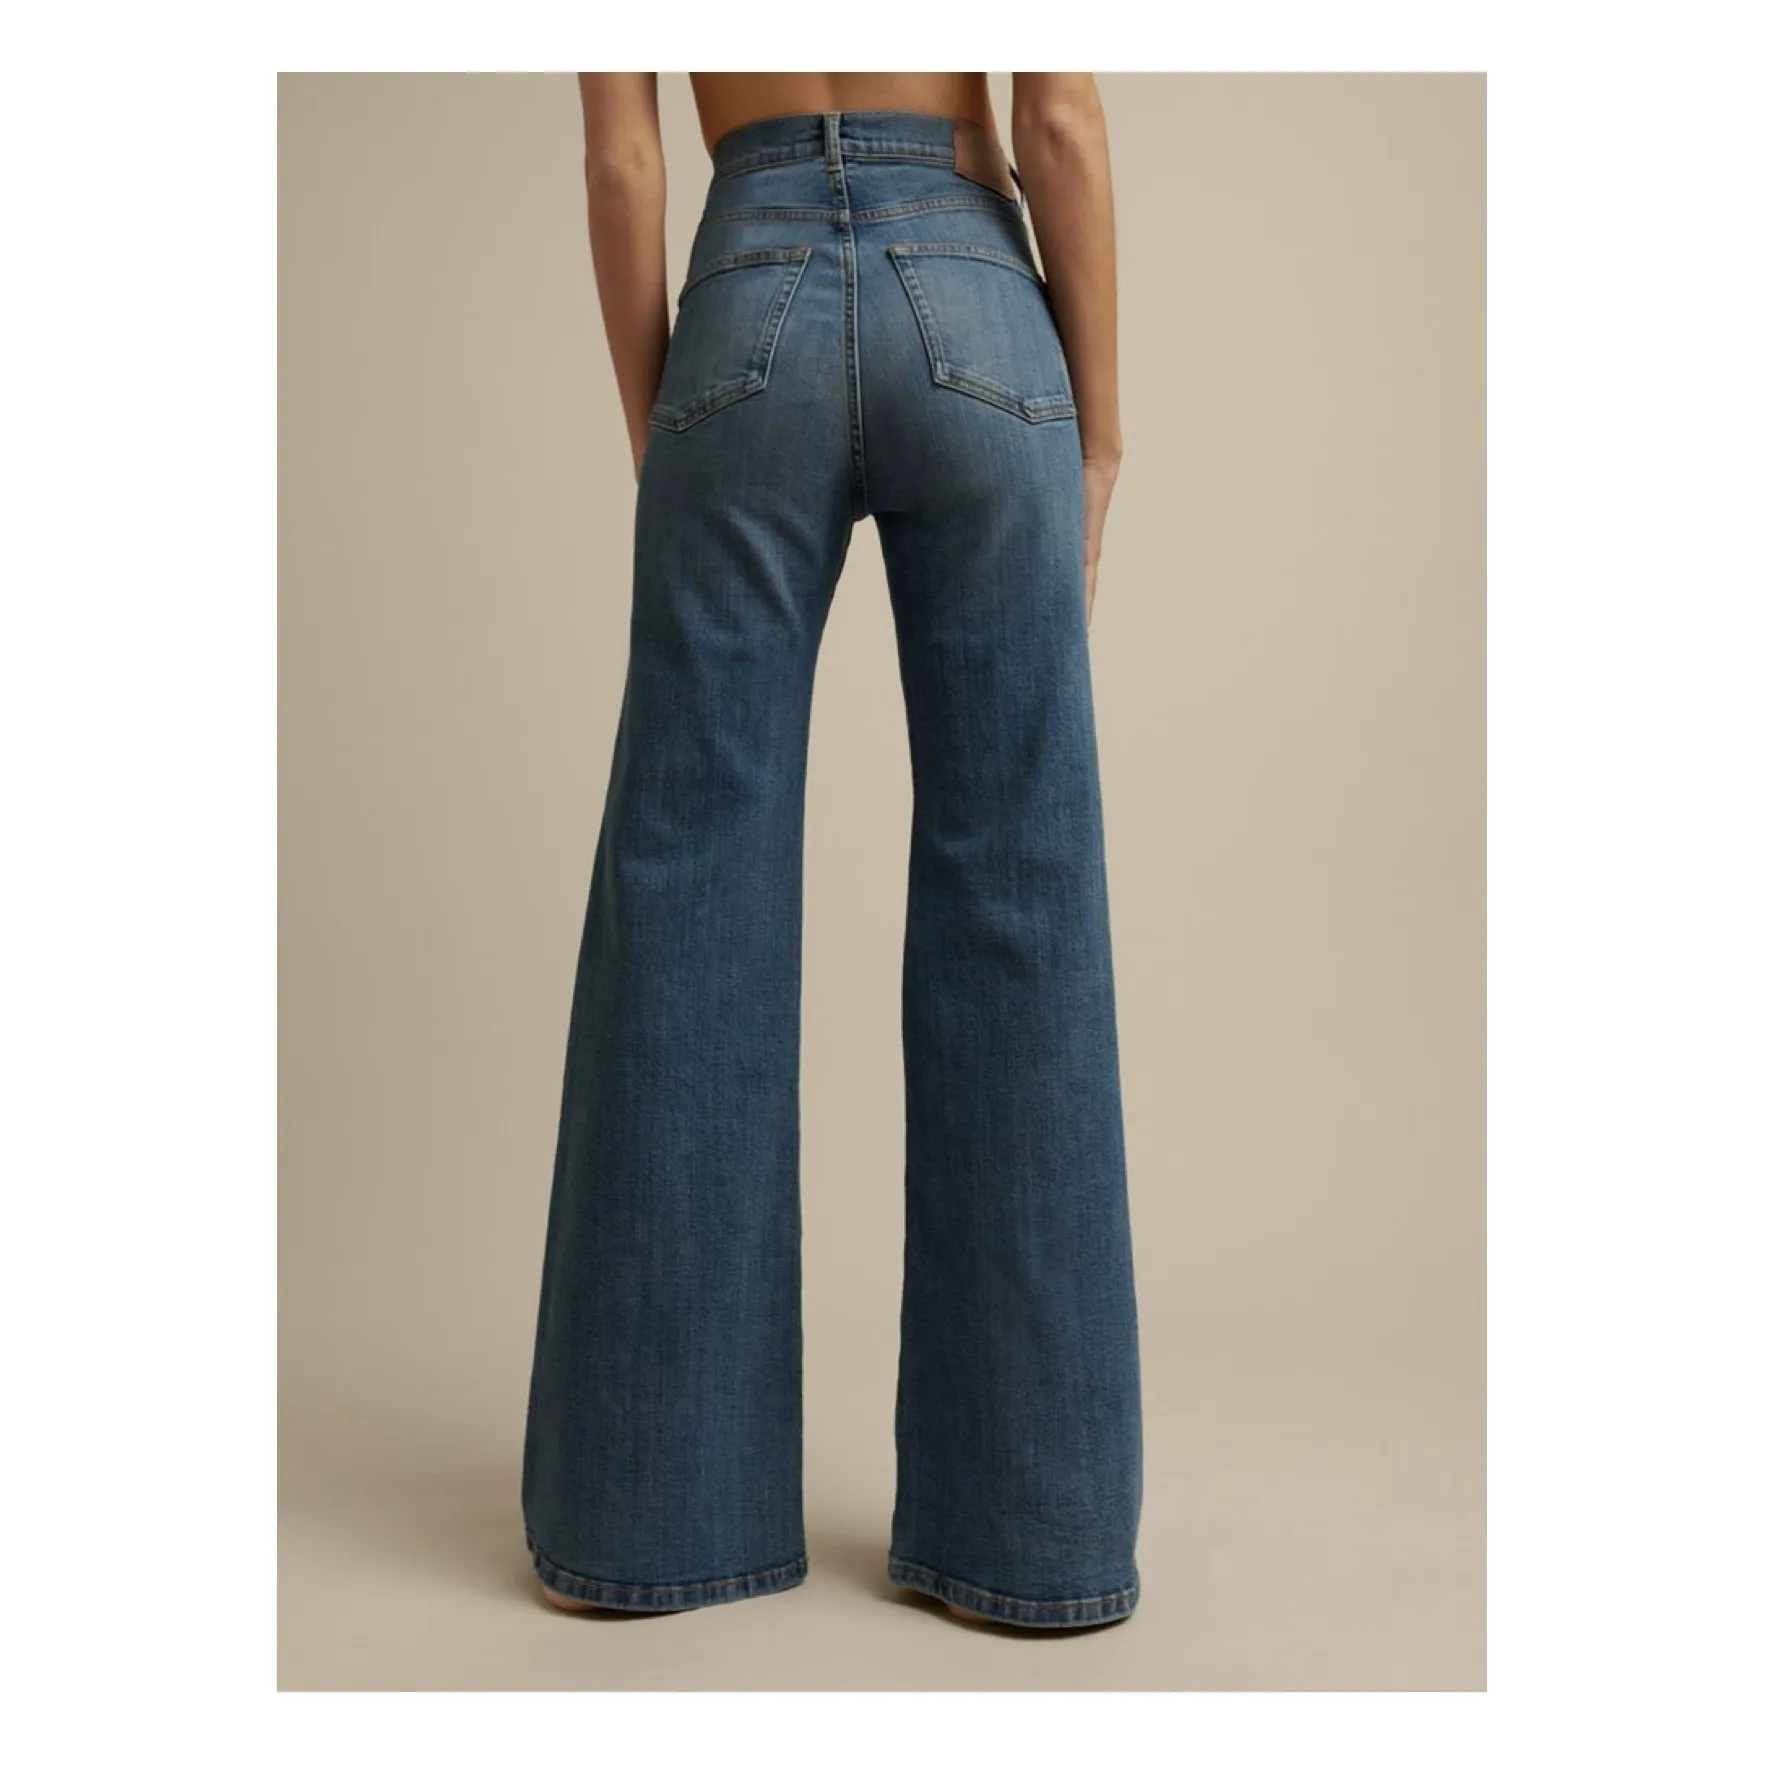 Jeans Louise Francoise Women's flared trousers: for sale at 16.99